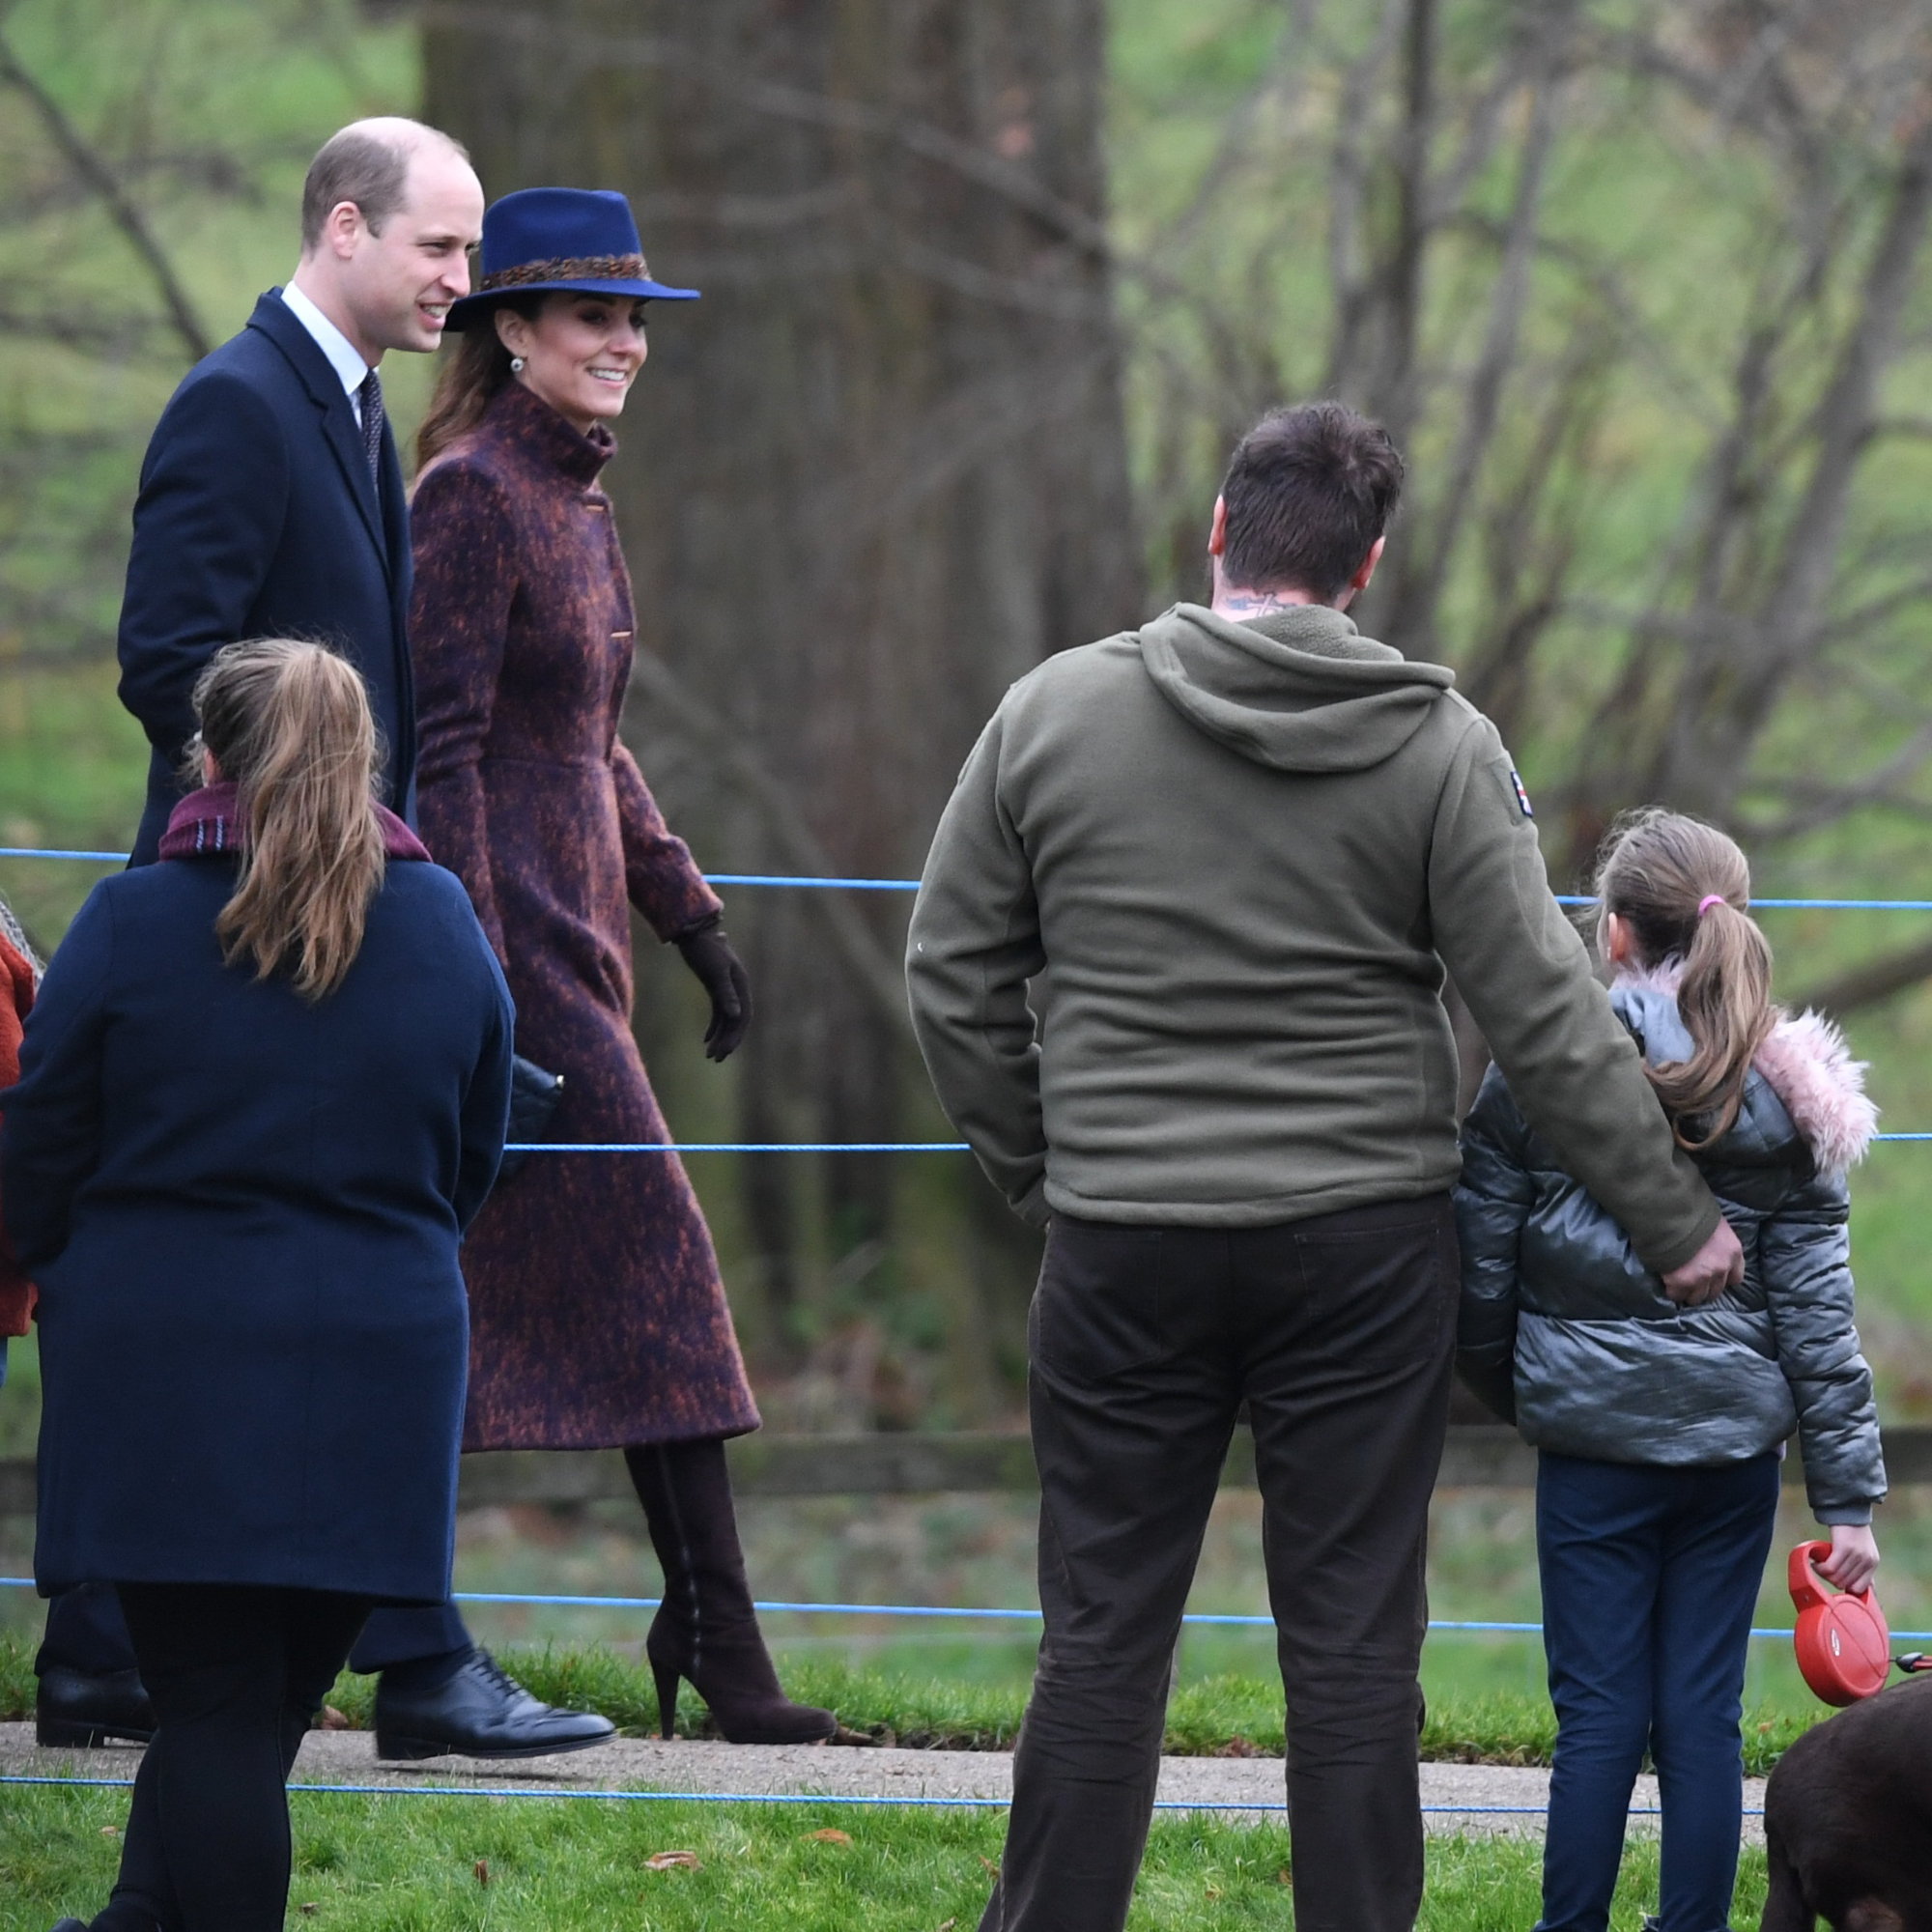 Members of The Royal Family attend Sunday Service at St Mary Magdalene Church, Sandringham, Norfolk, UK, on the 5th January 2020.
05 Jan 2020, Image: 491090749, License: Rights-managed, Restrictions: NO United Kingdom, Model Release: no, Credit line: James Whatling / Mega Agency / Profimedia